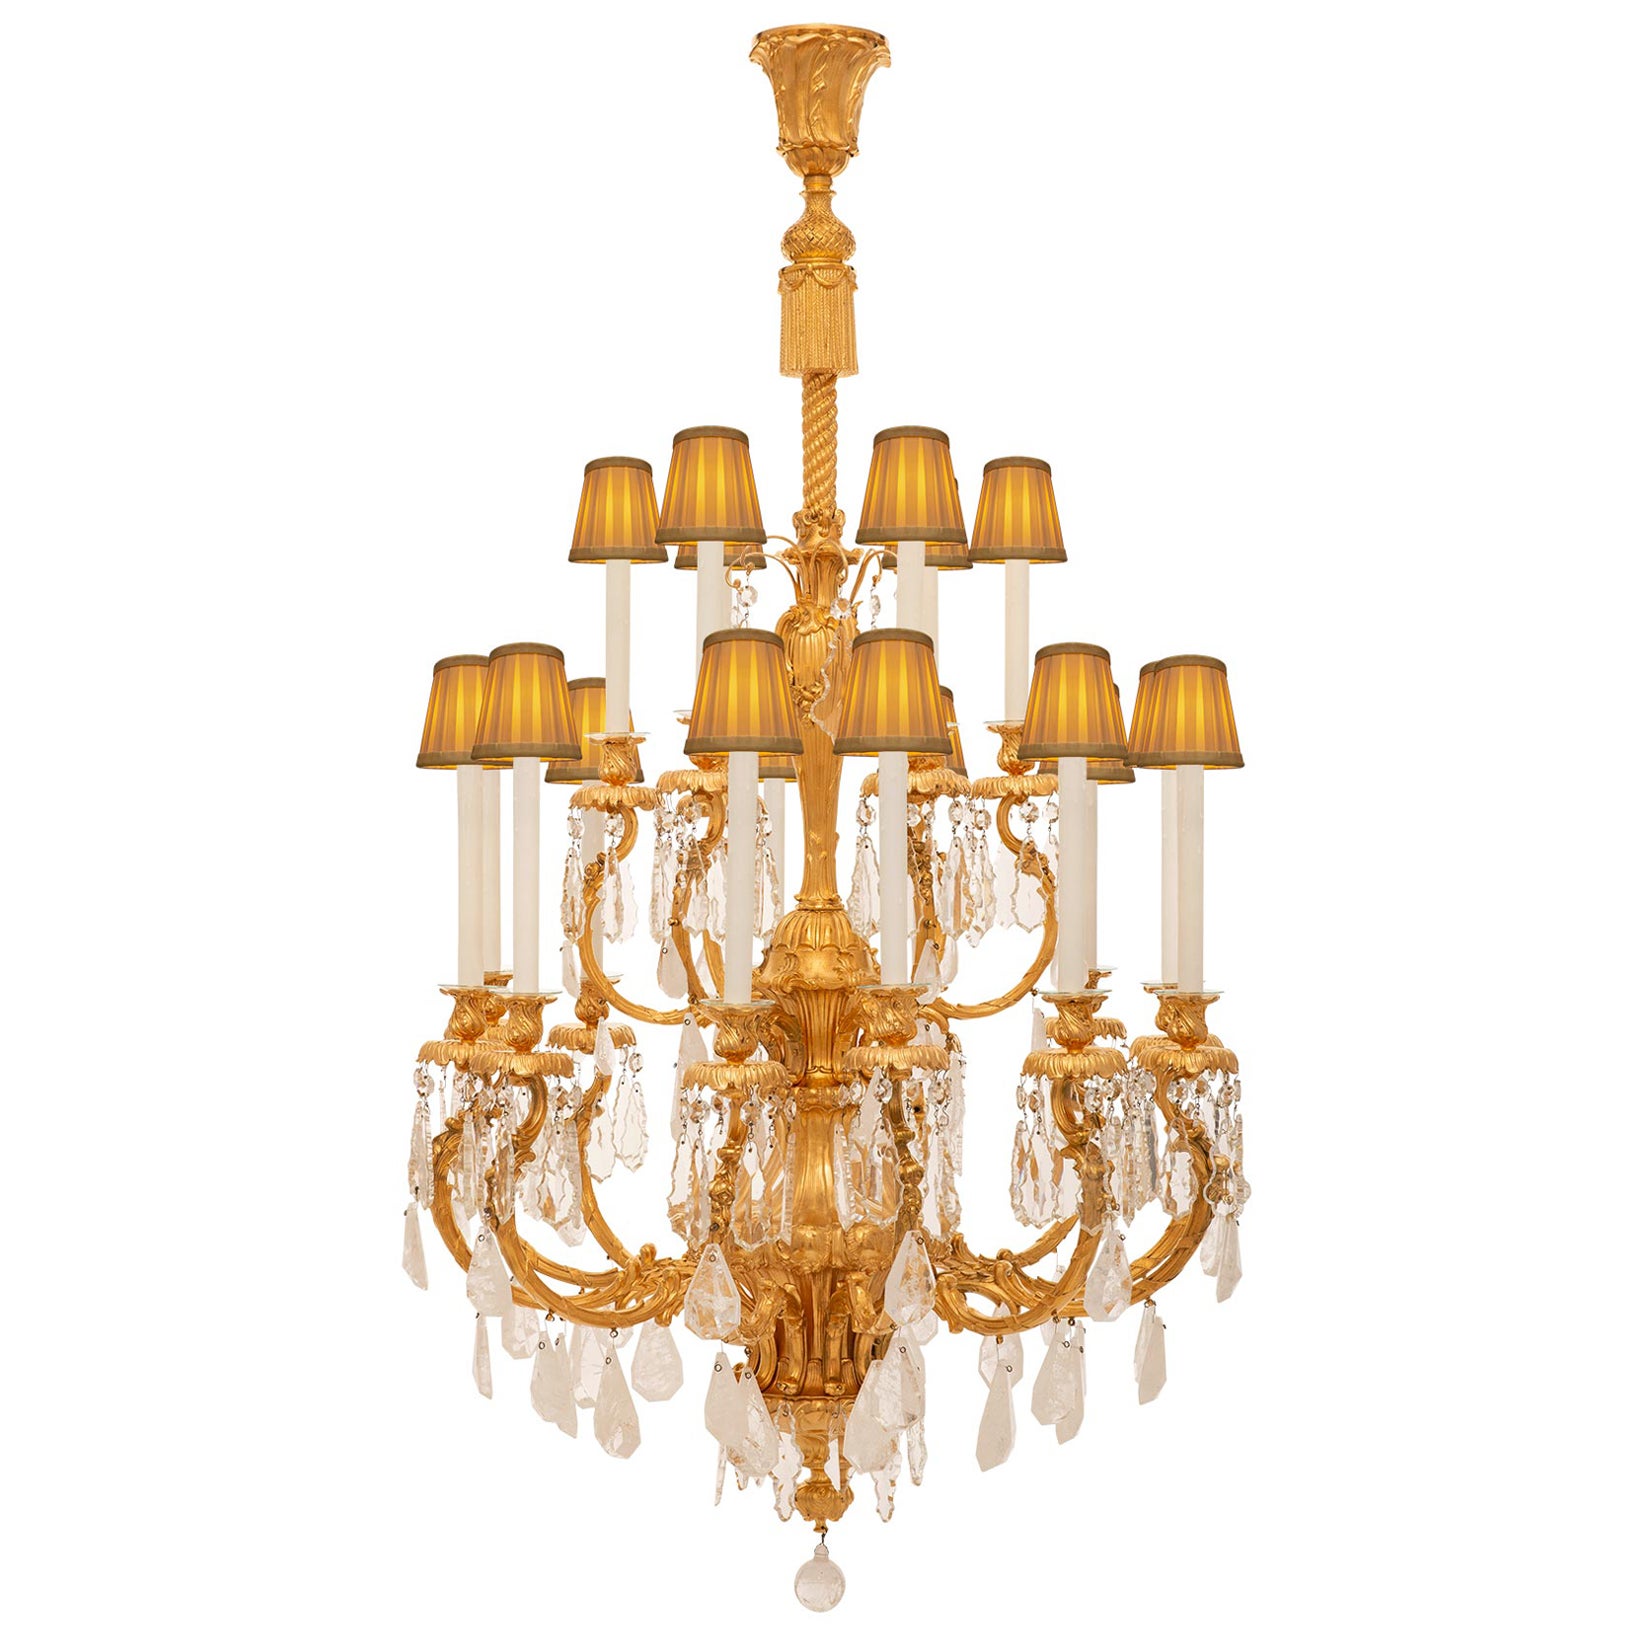 French Louis XV St. Ormolu, Rock Crystal & Baccarat Crystal Chandelier For Sale